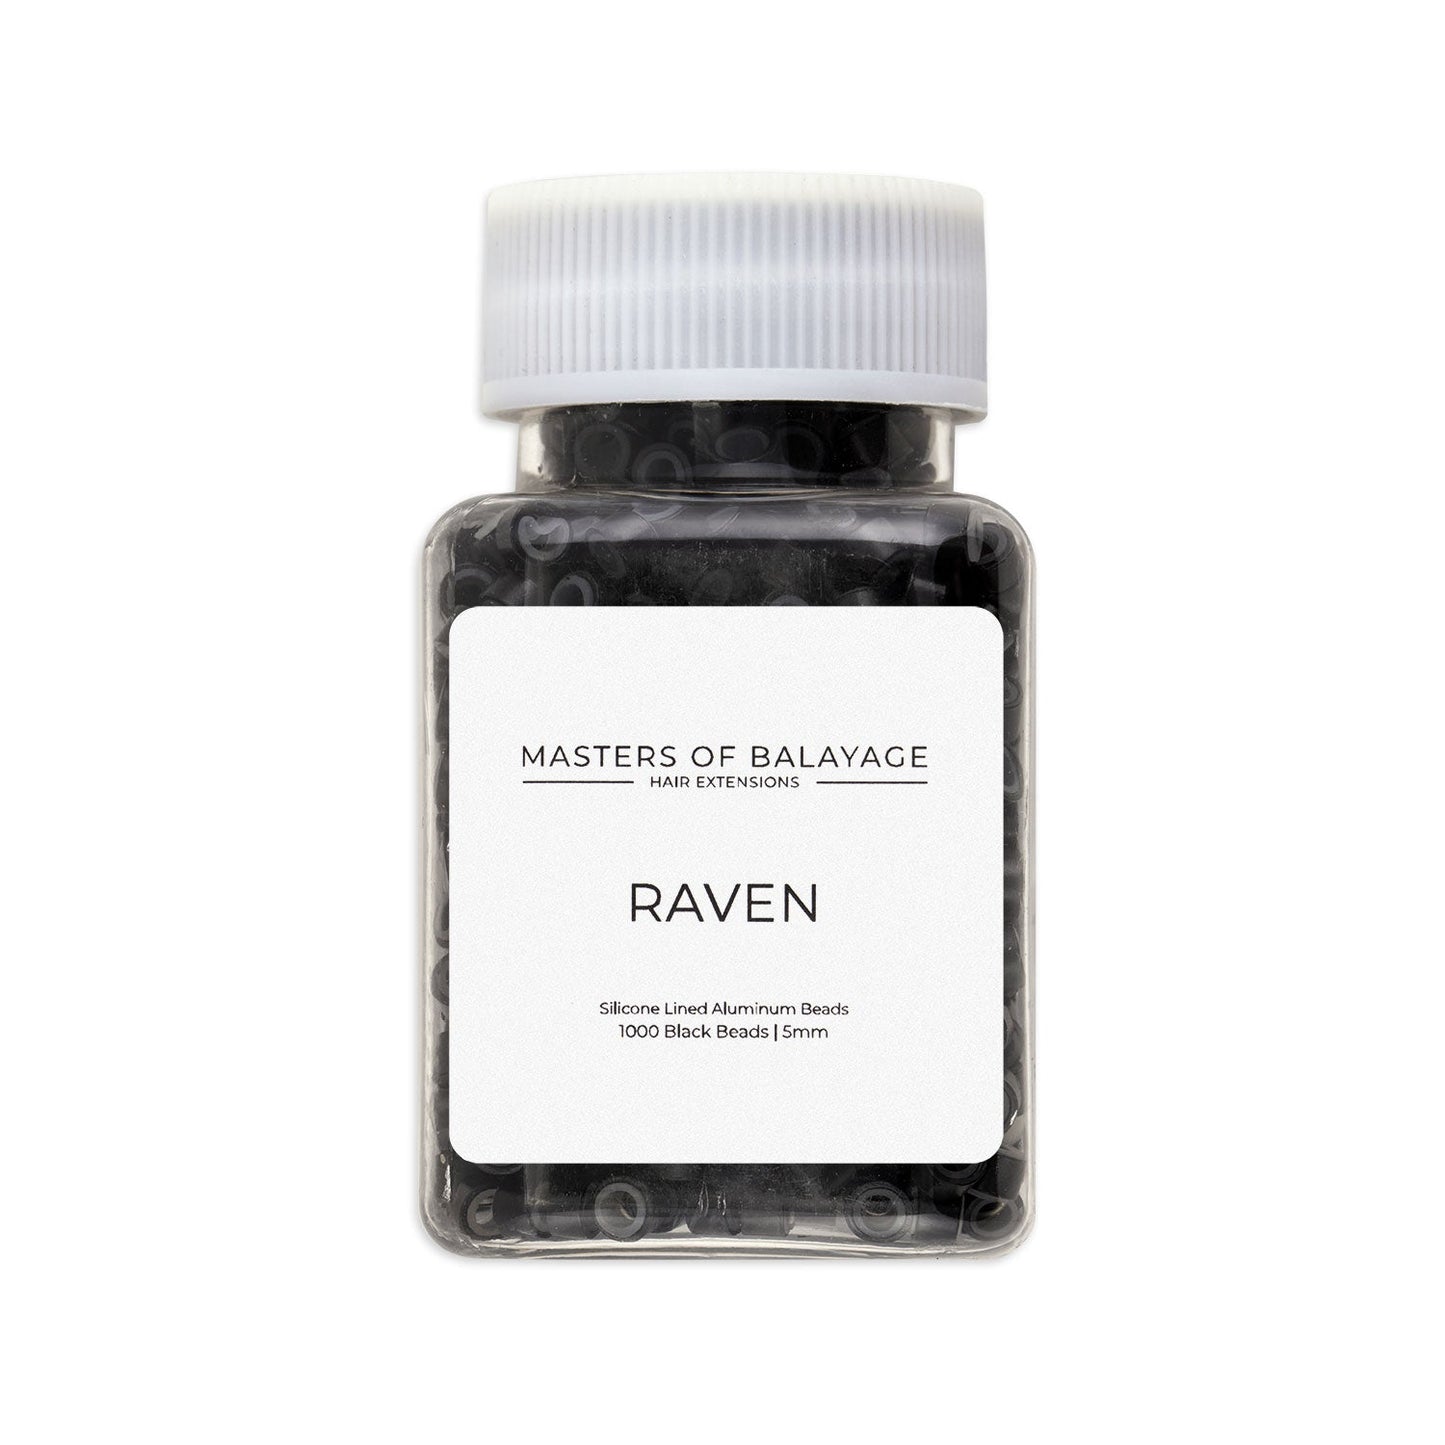 Silicone Lined Aluminum Beads - Raven - Licensed Professional